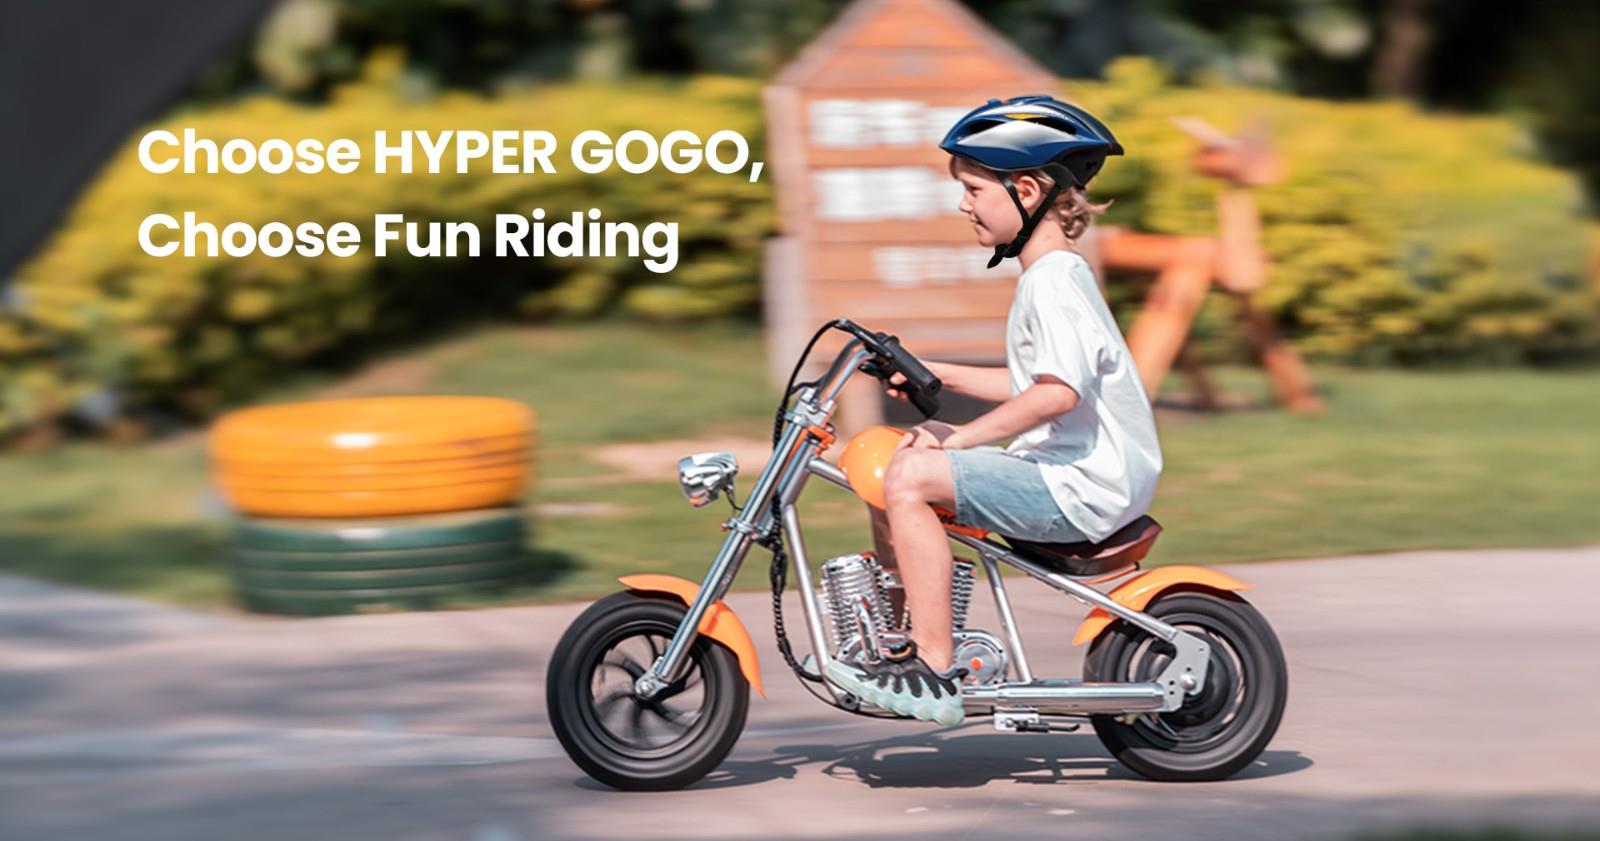 Hyper GOGO Challenger 12 Plus Electric Motorcycle with App for Kids, 12 x 3 Tires, 160W, 5.2Ah, Bluetooth Speaker - Green